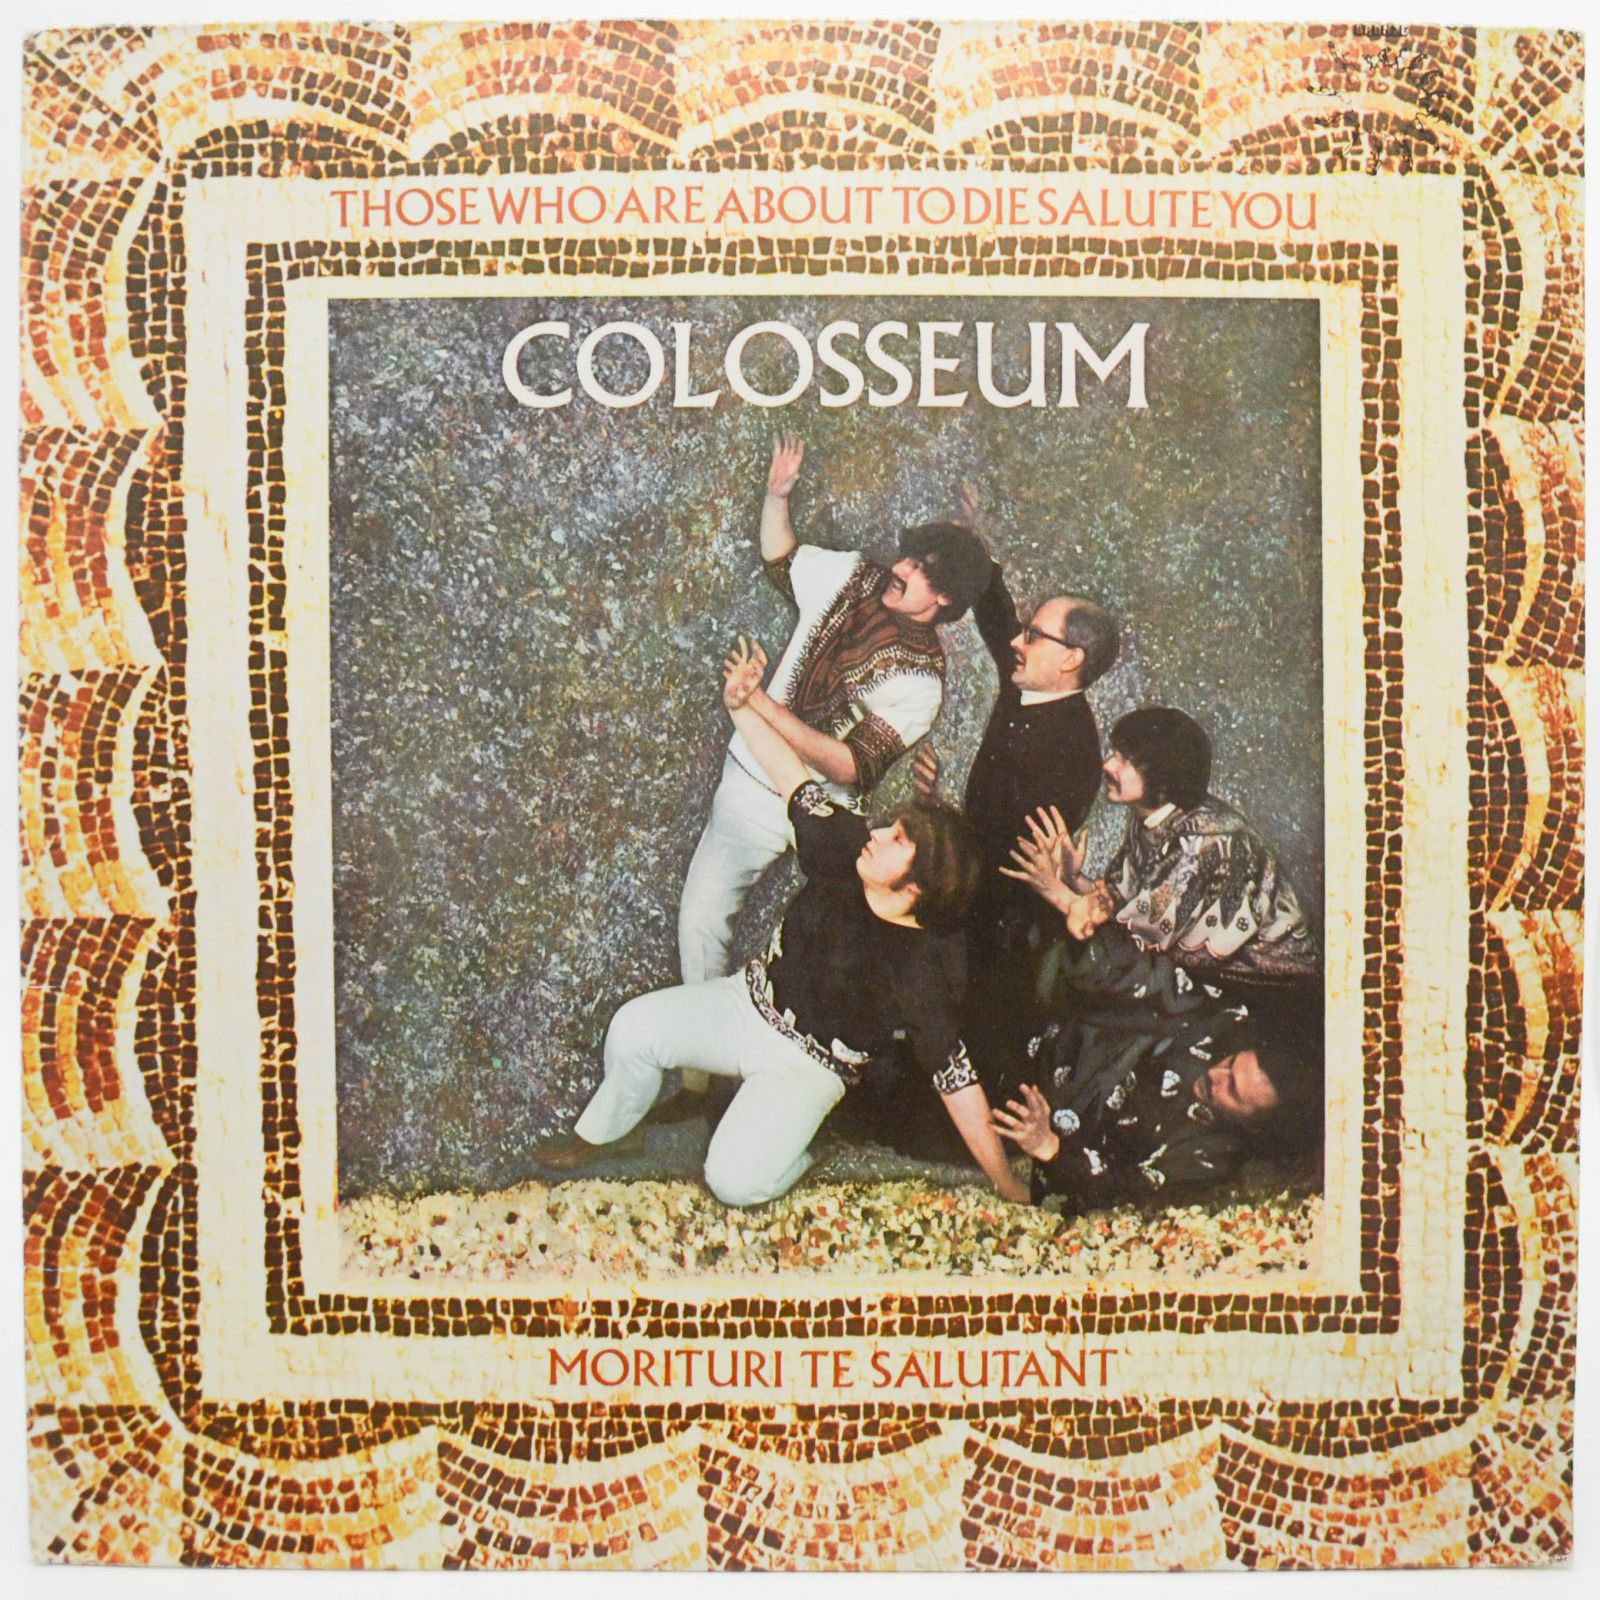 Colosseum — Those Who Are About To Die Salute You, 1969